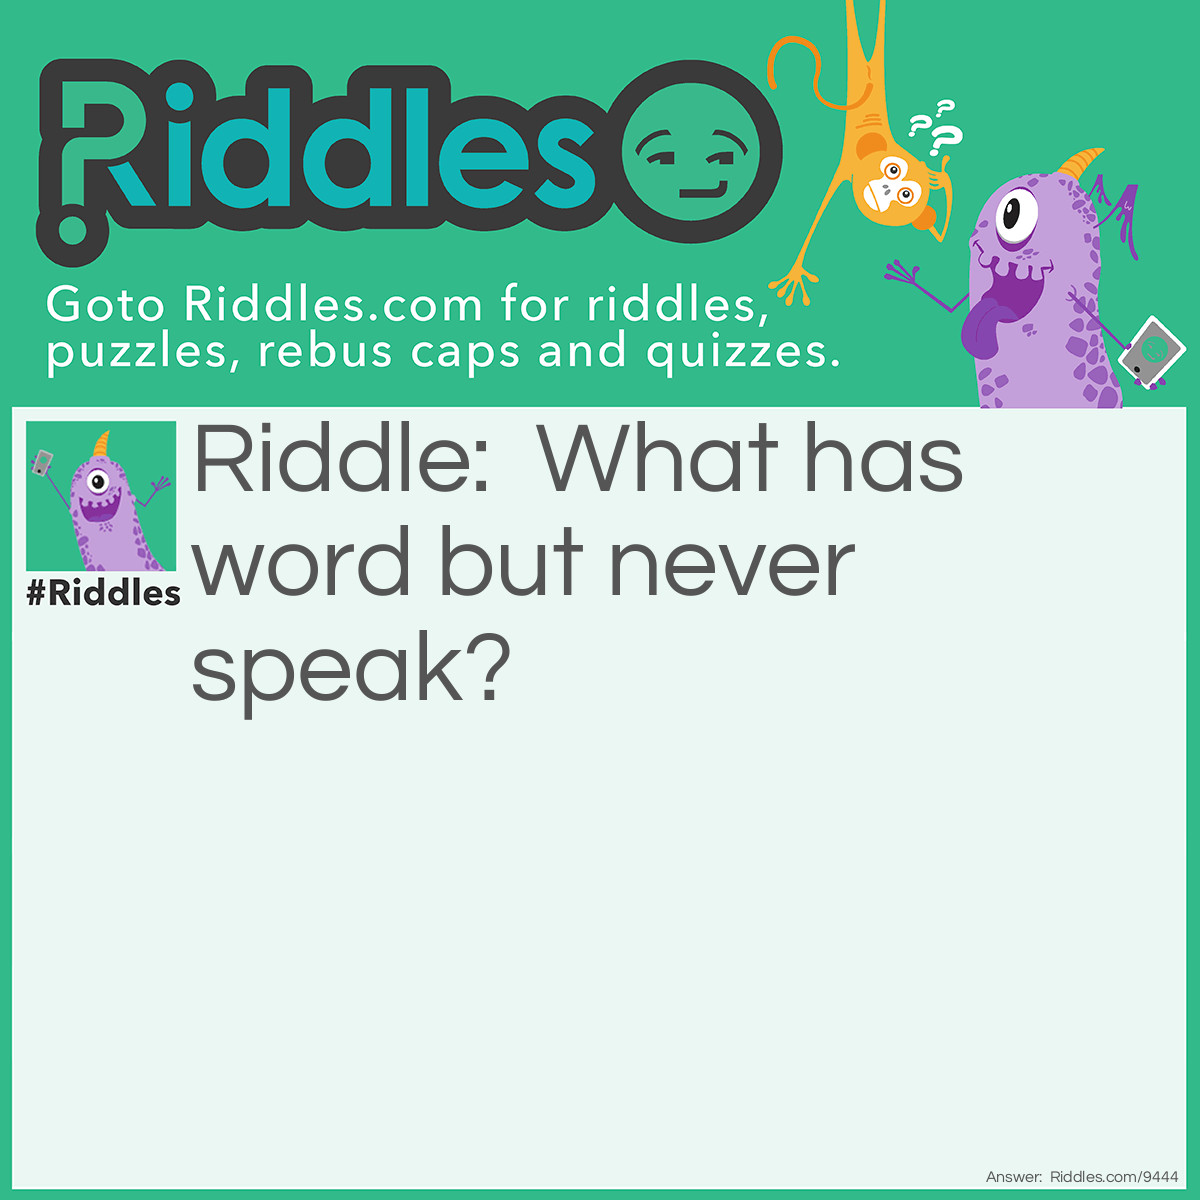 Riddle: What has word but never speak? Answer: A BOOK.